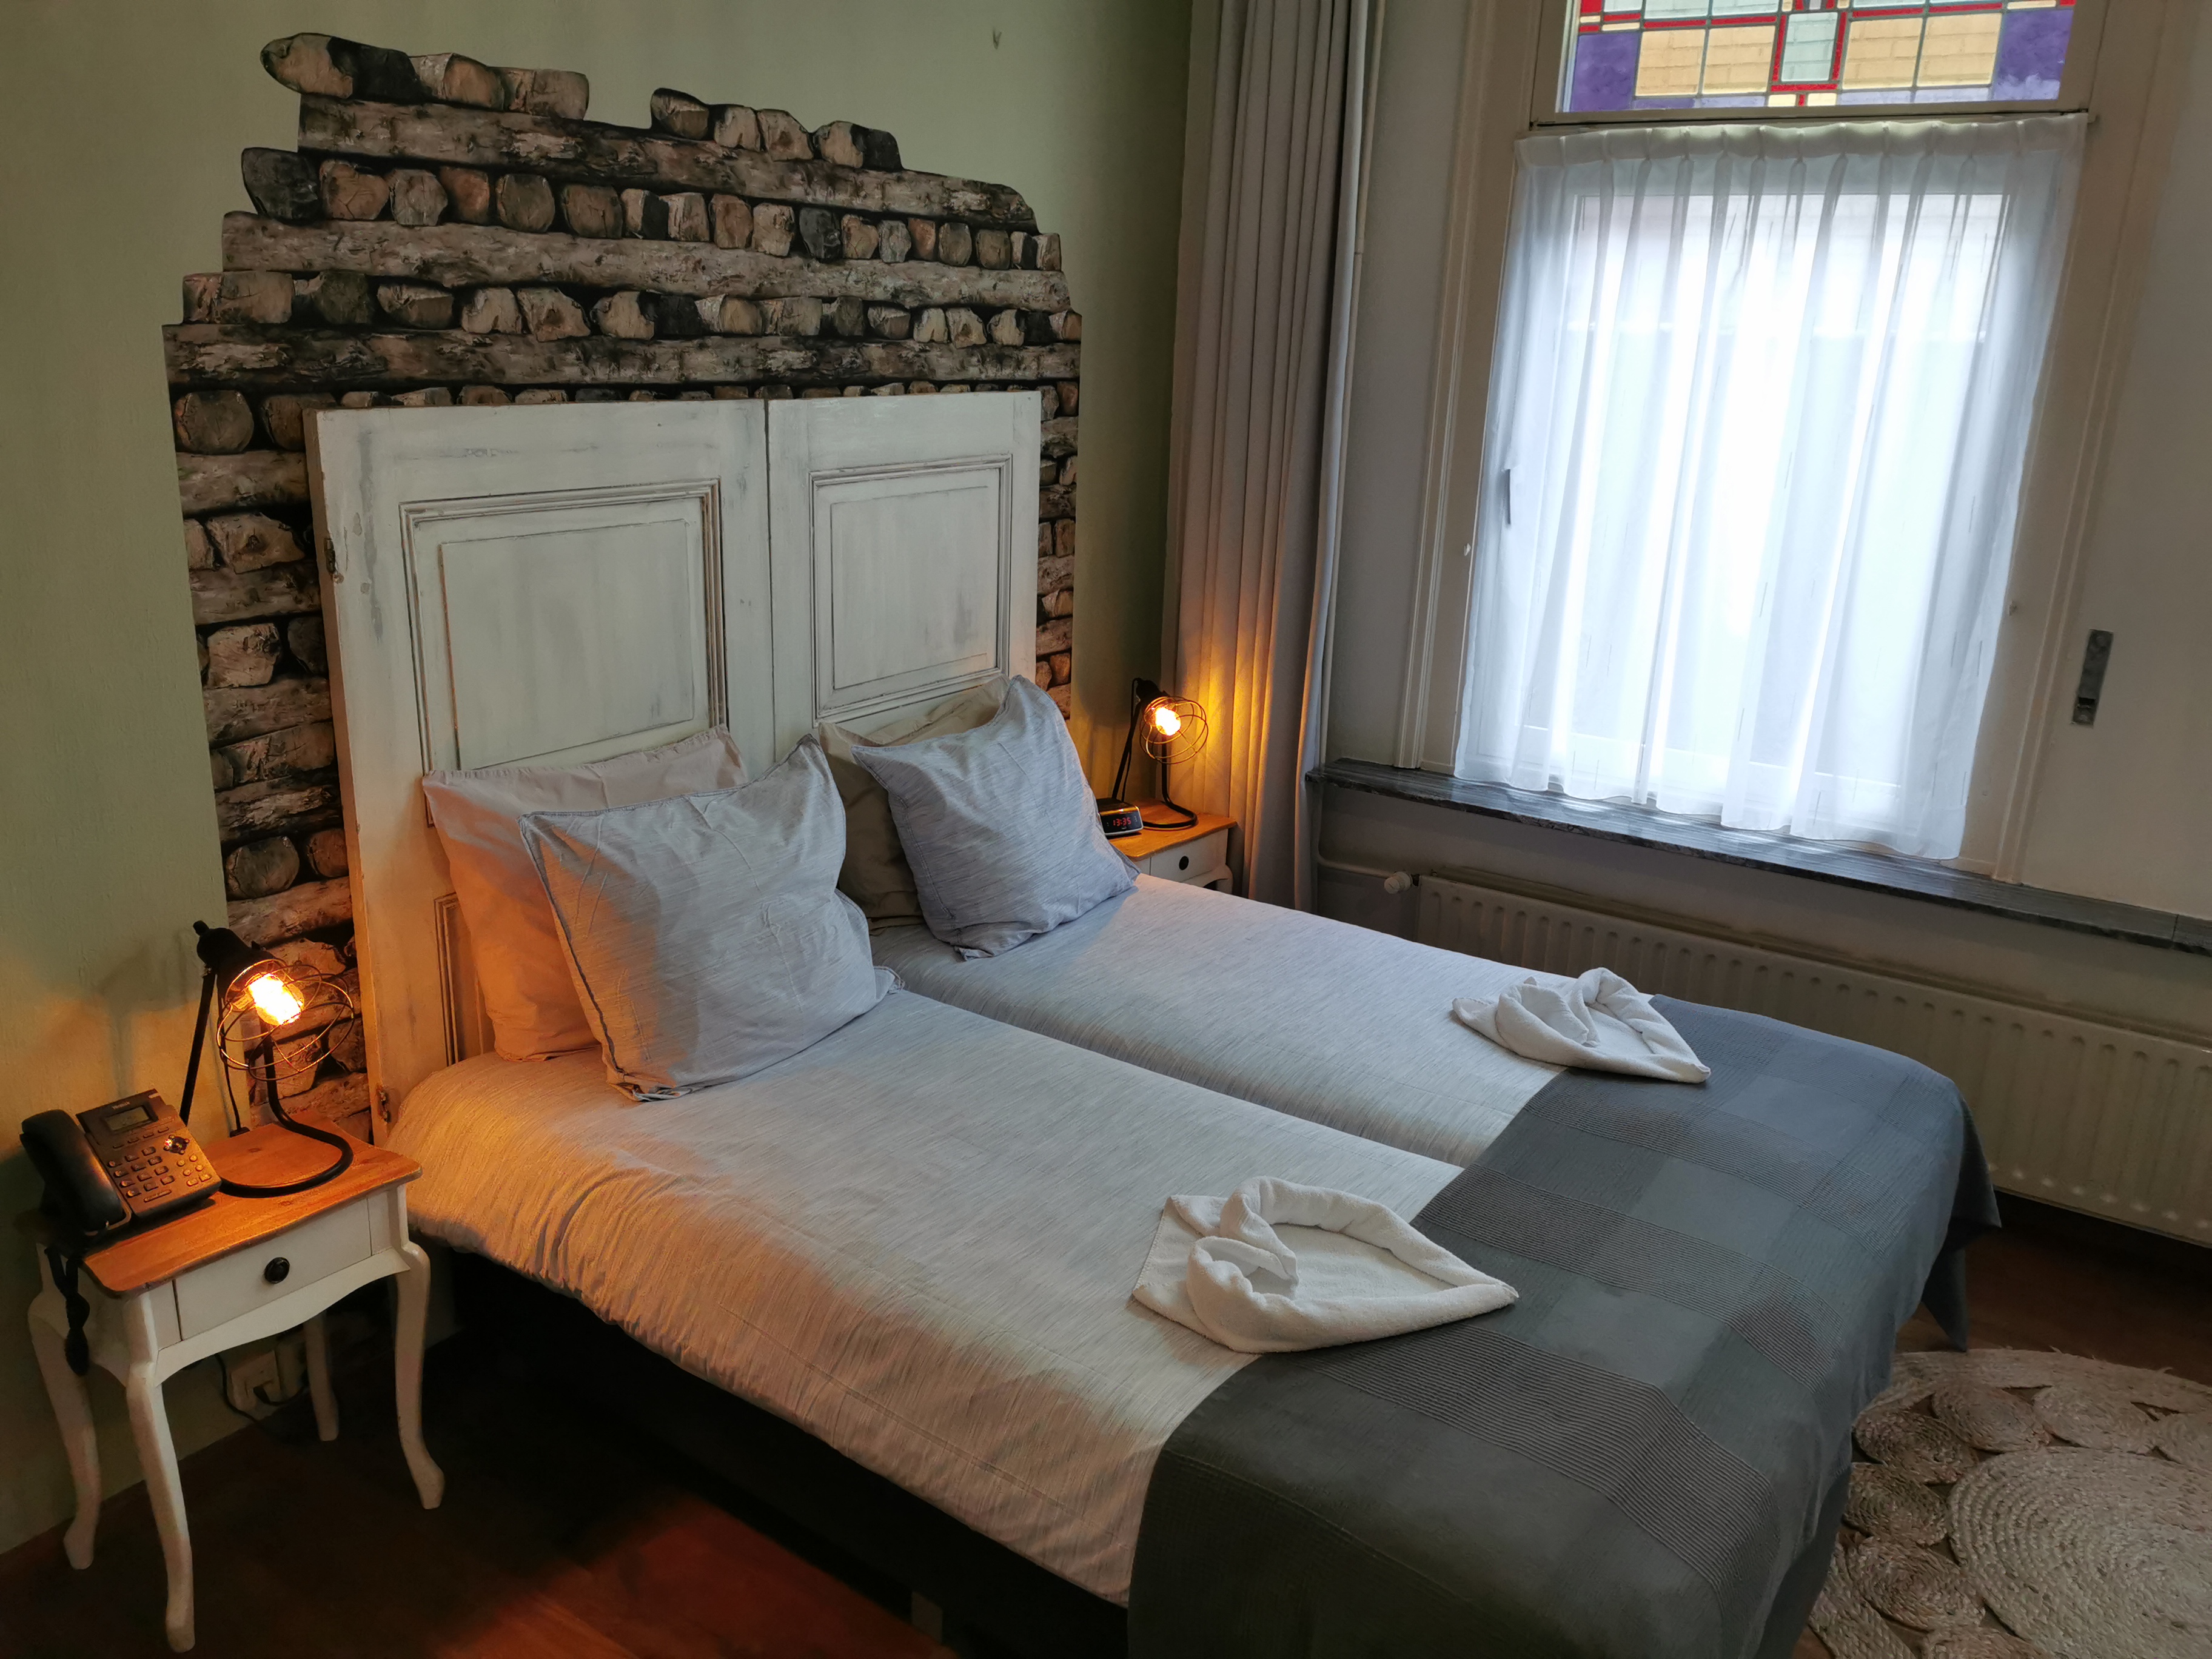 Hotel Heere <br/>82.00 ew <br/> <a href='http://vakantieoplossing.nl/outpage/?id=0bb9cd1bf1b98bb9cec0371d27563efc' target='_blank'>View Details</a>